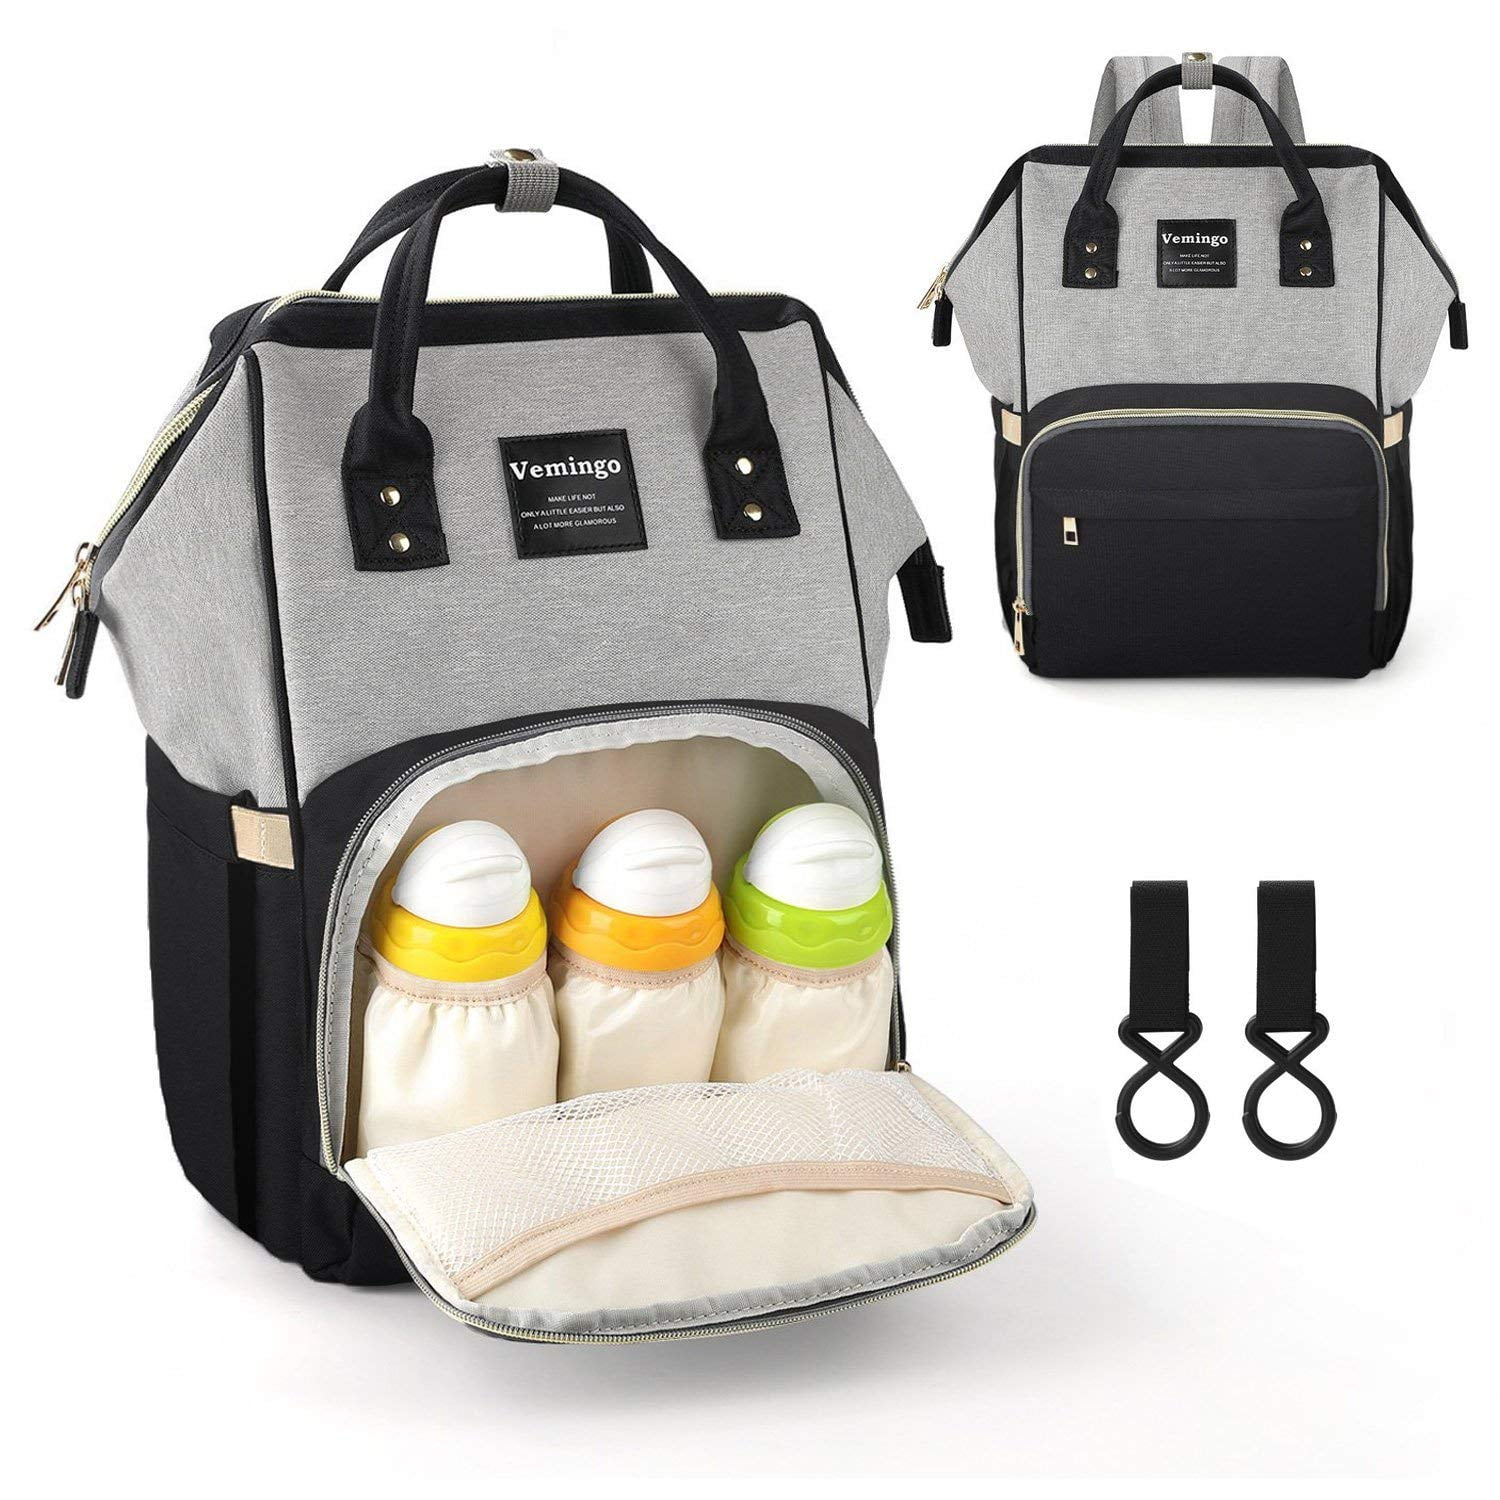 Baby Changing Bag Backpack Baby Care Nappy Bags Large Capacity Multifunction Maternity Bag Gray